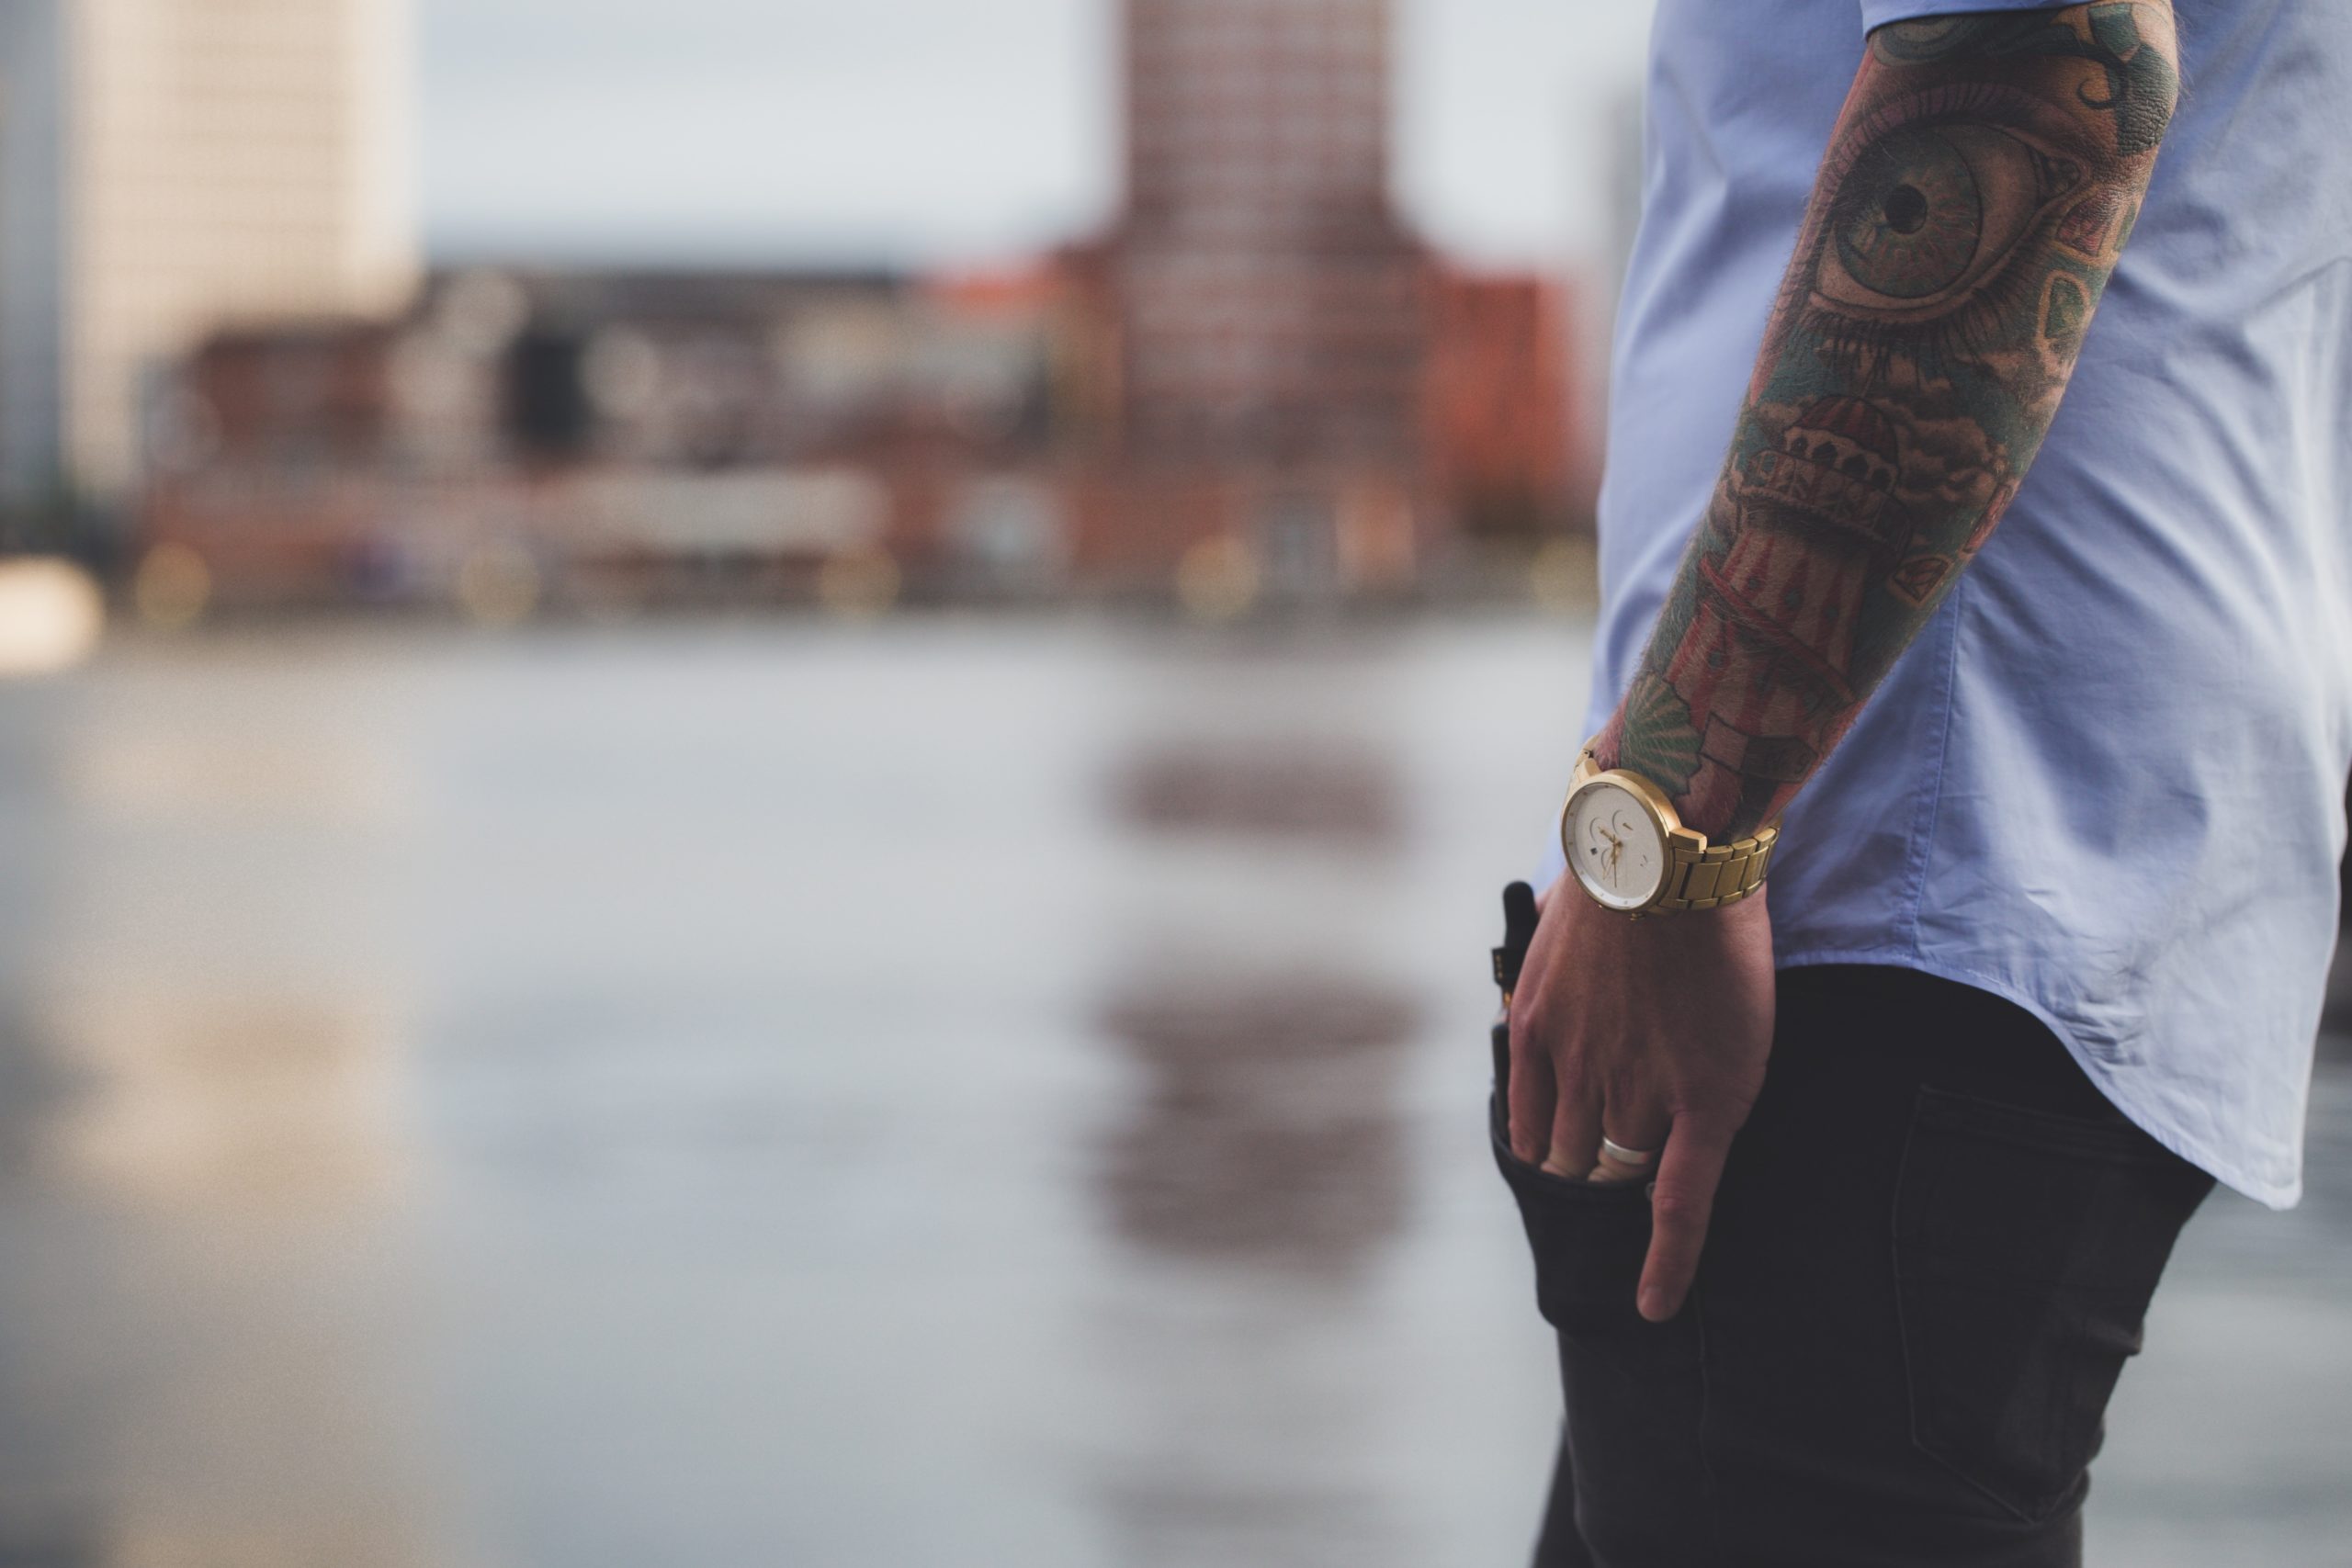 A torso shot of a man with a gold wristwatch on.